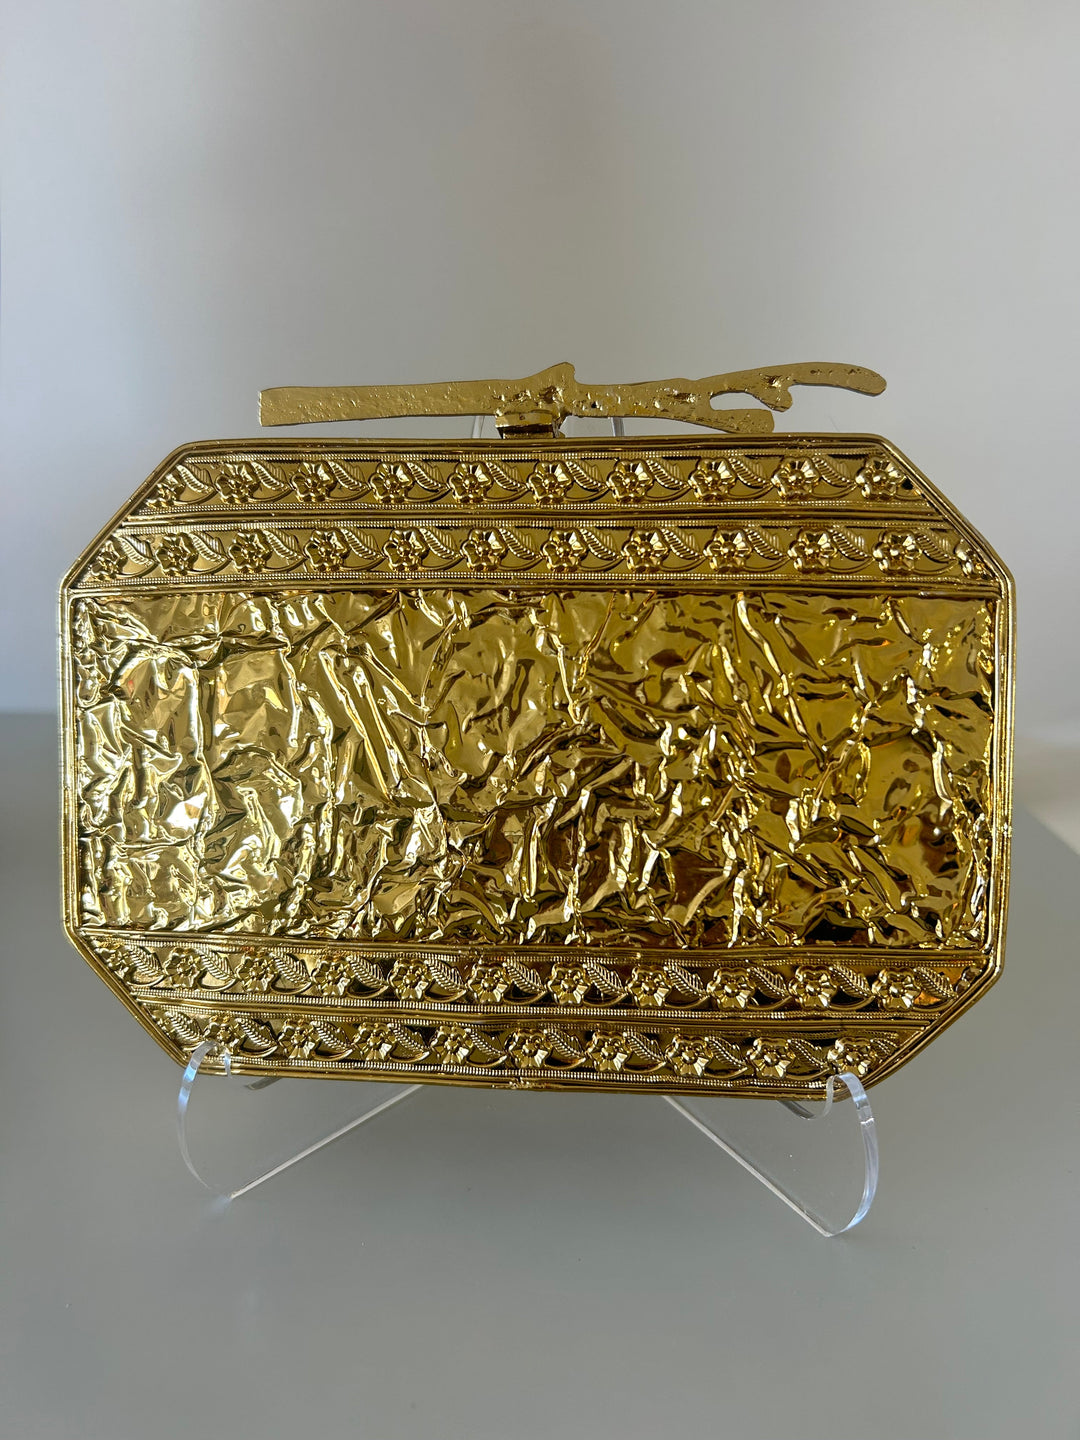 Gilded Clutch